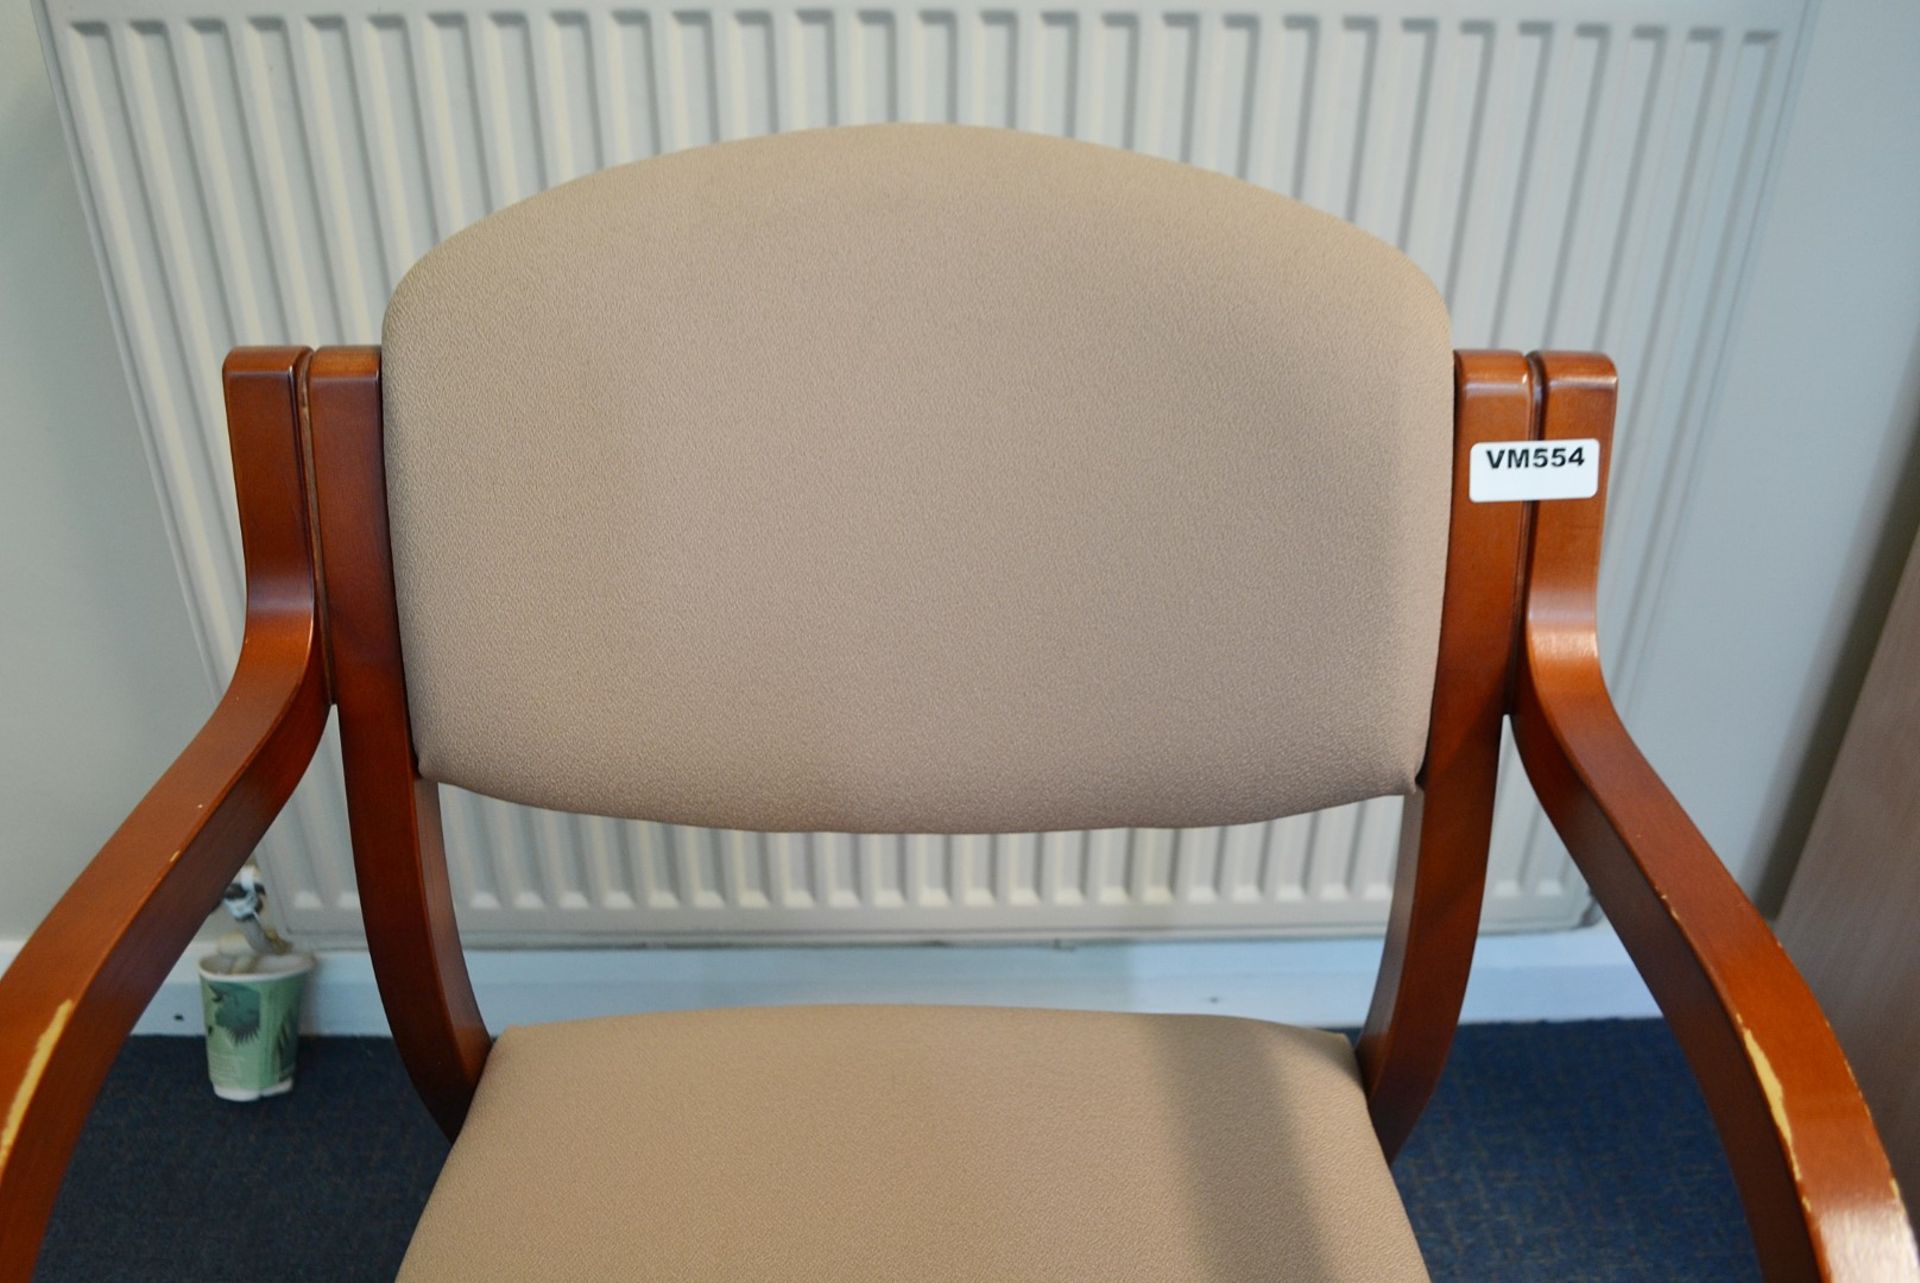 4 x Beige Office Boardroom Chairs - Ref: VM554 - CL409 - Location: Wakefield WF16 - Image 2 of 5